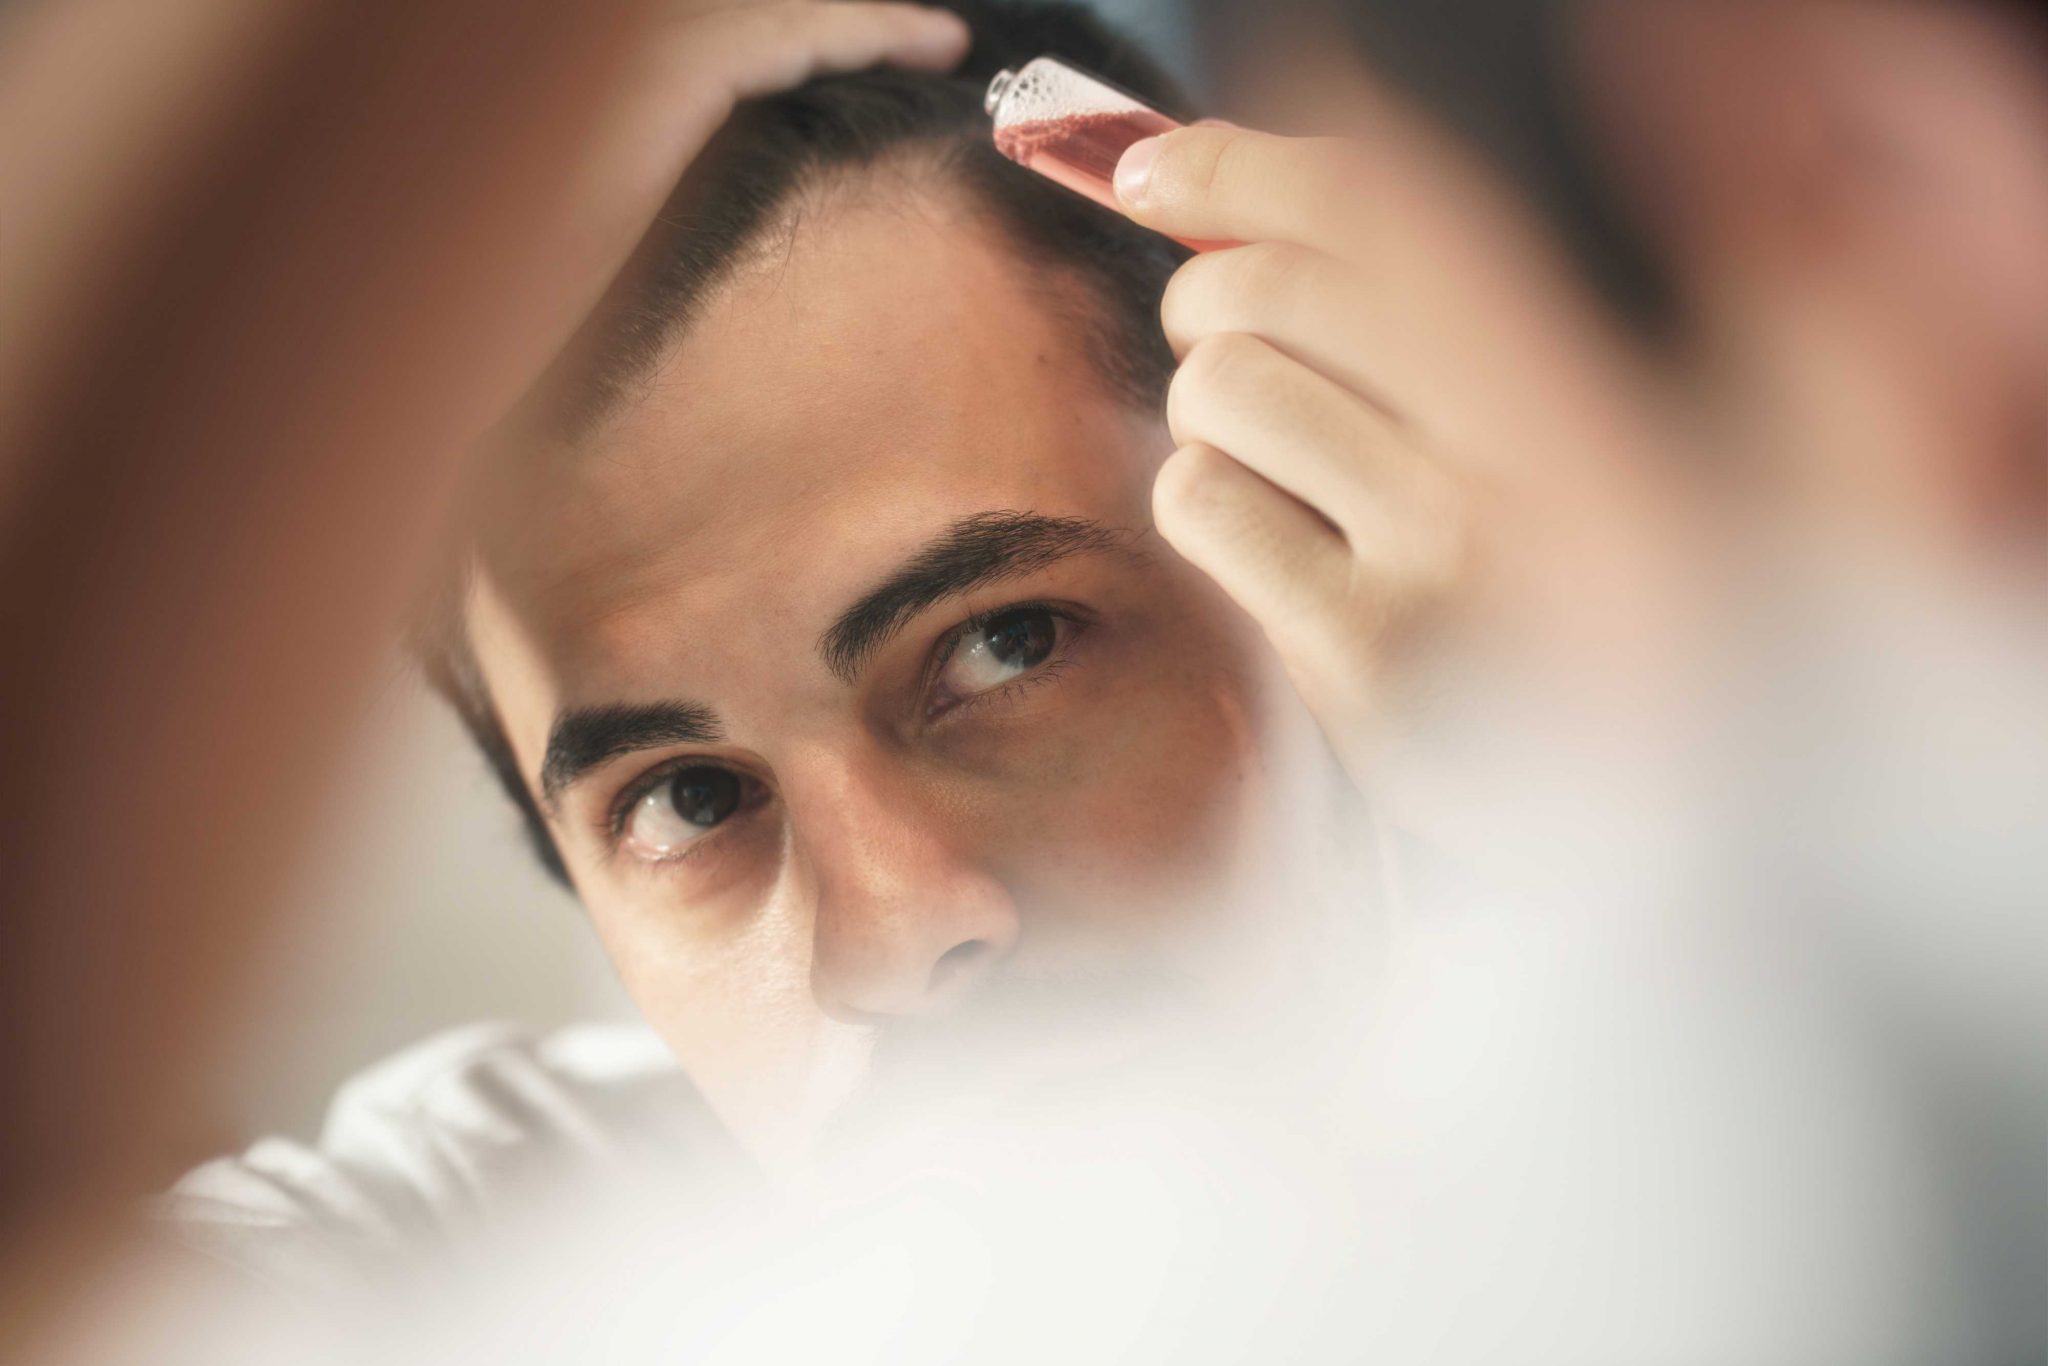 Low Testosterone and Hair Loss: What You Need to Know - wide 5